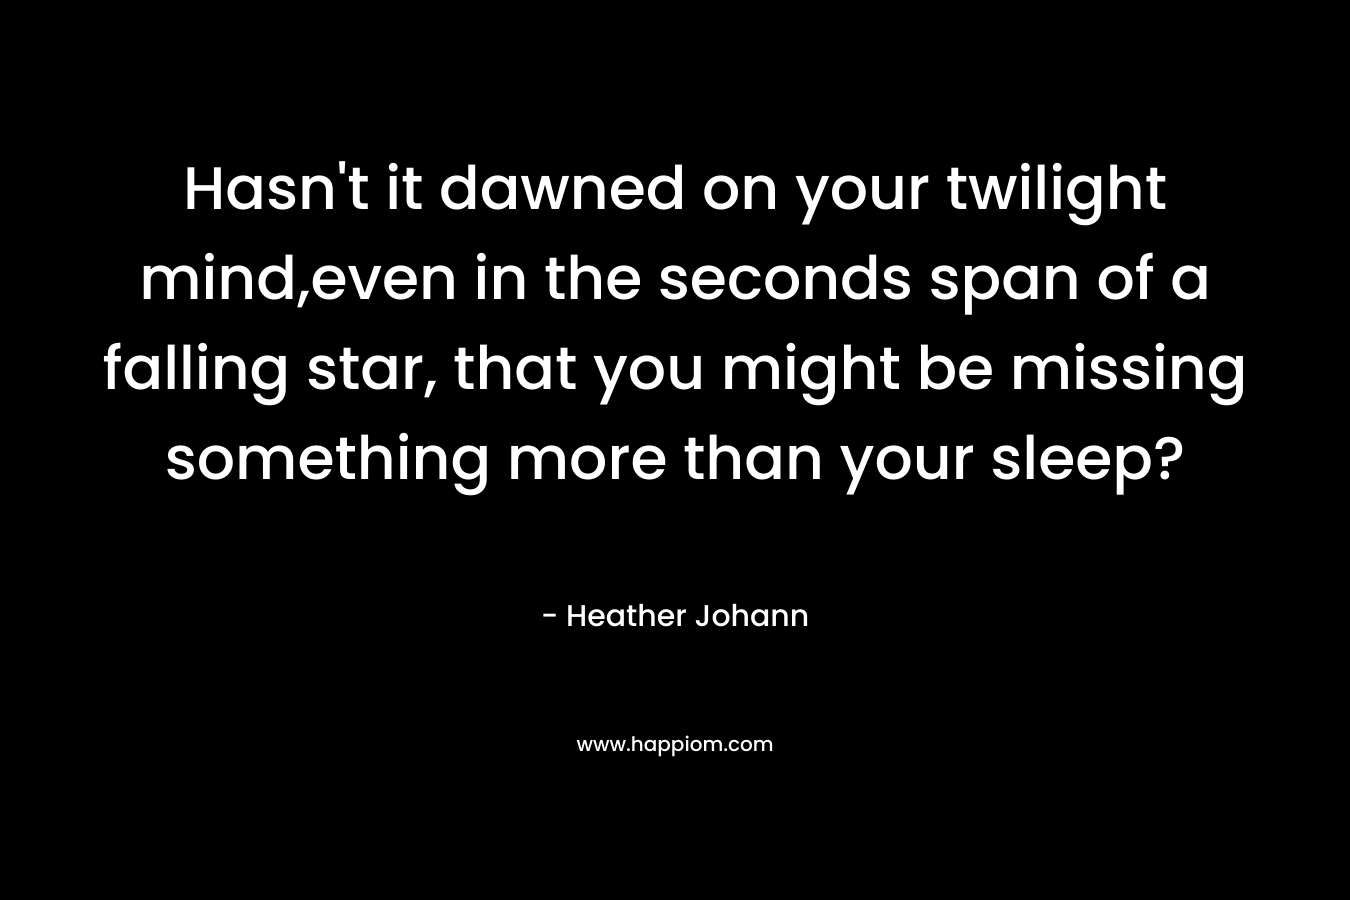 Hasn’t it dawned on your twilight mind,even in the seconds span of a falling star, that you might be missing something more than your sleep? – Heather Johann